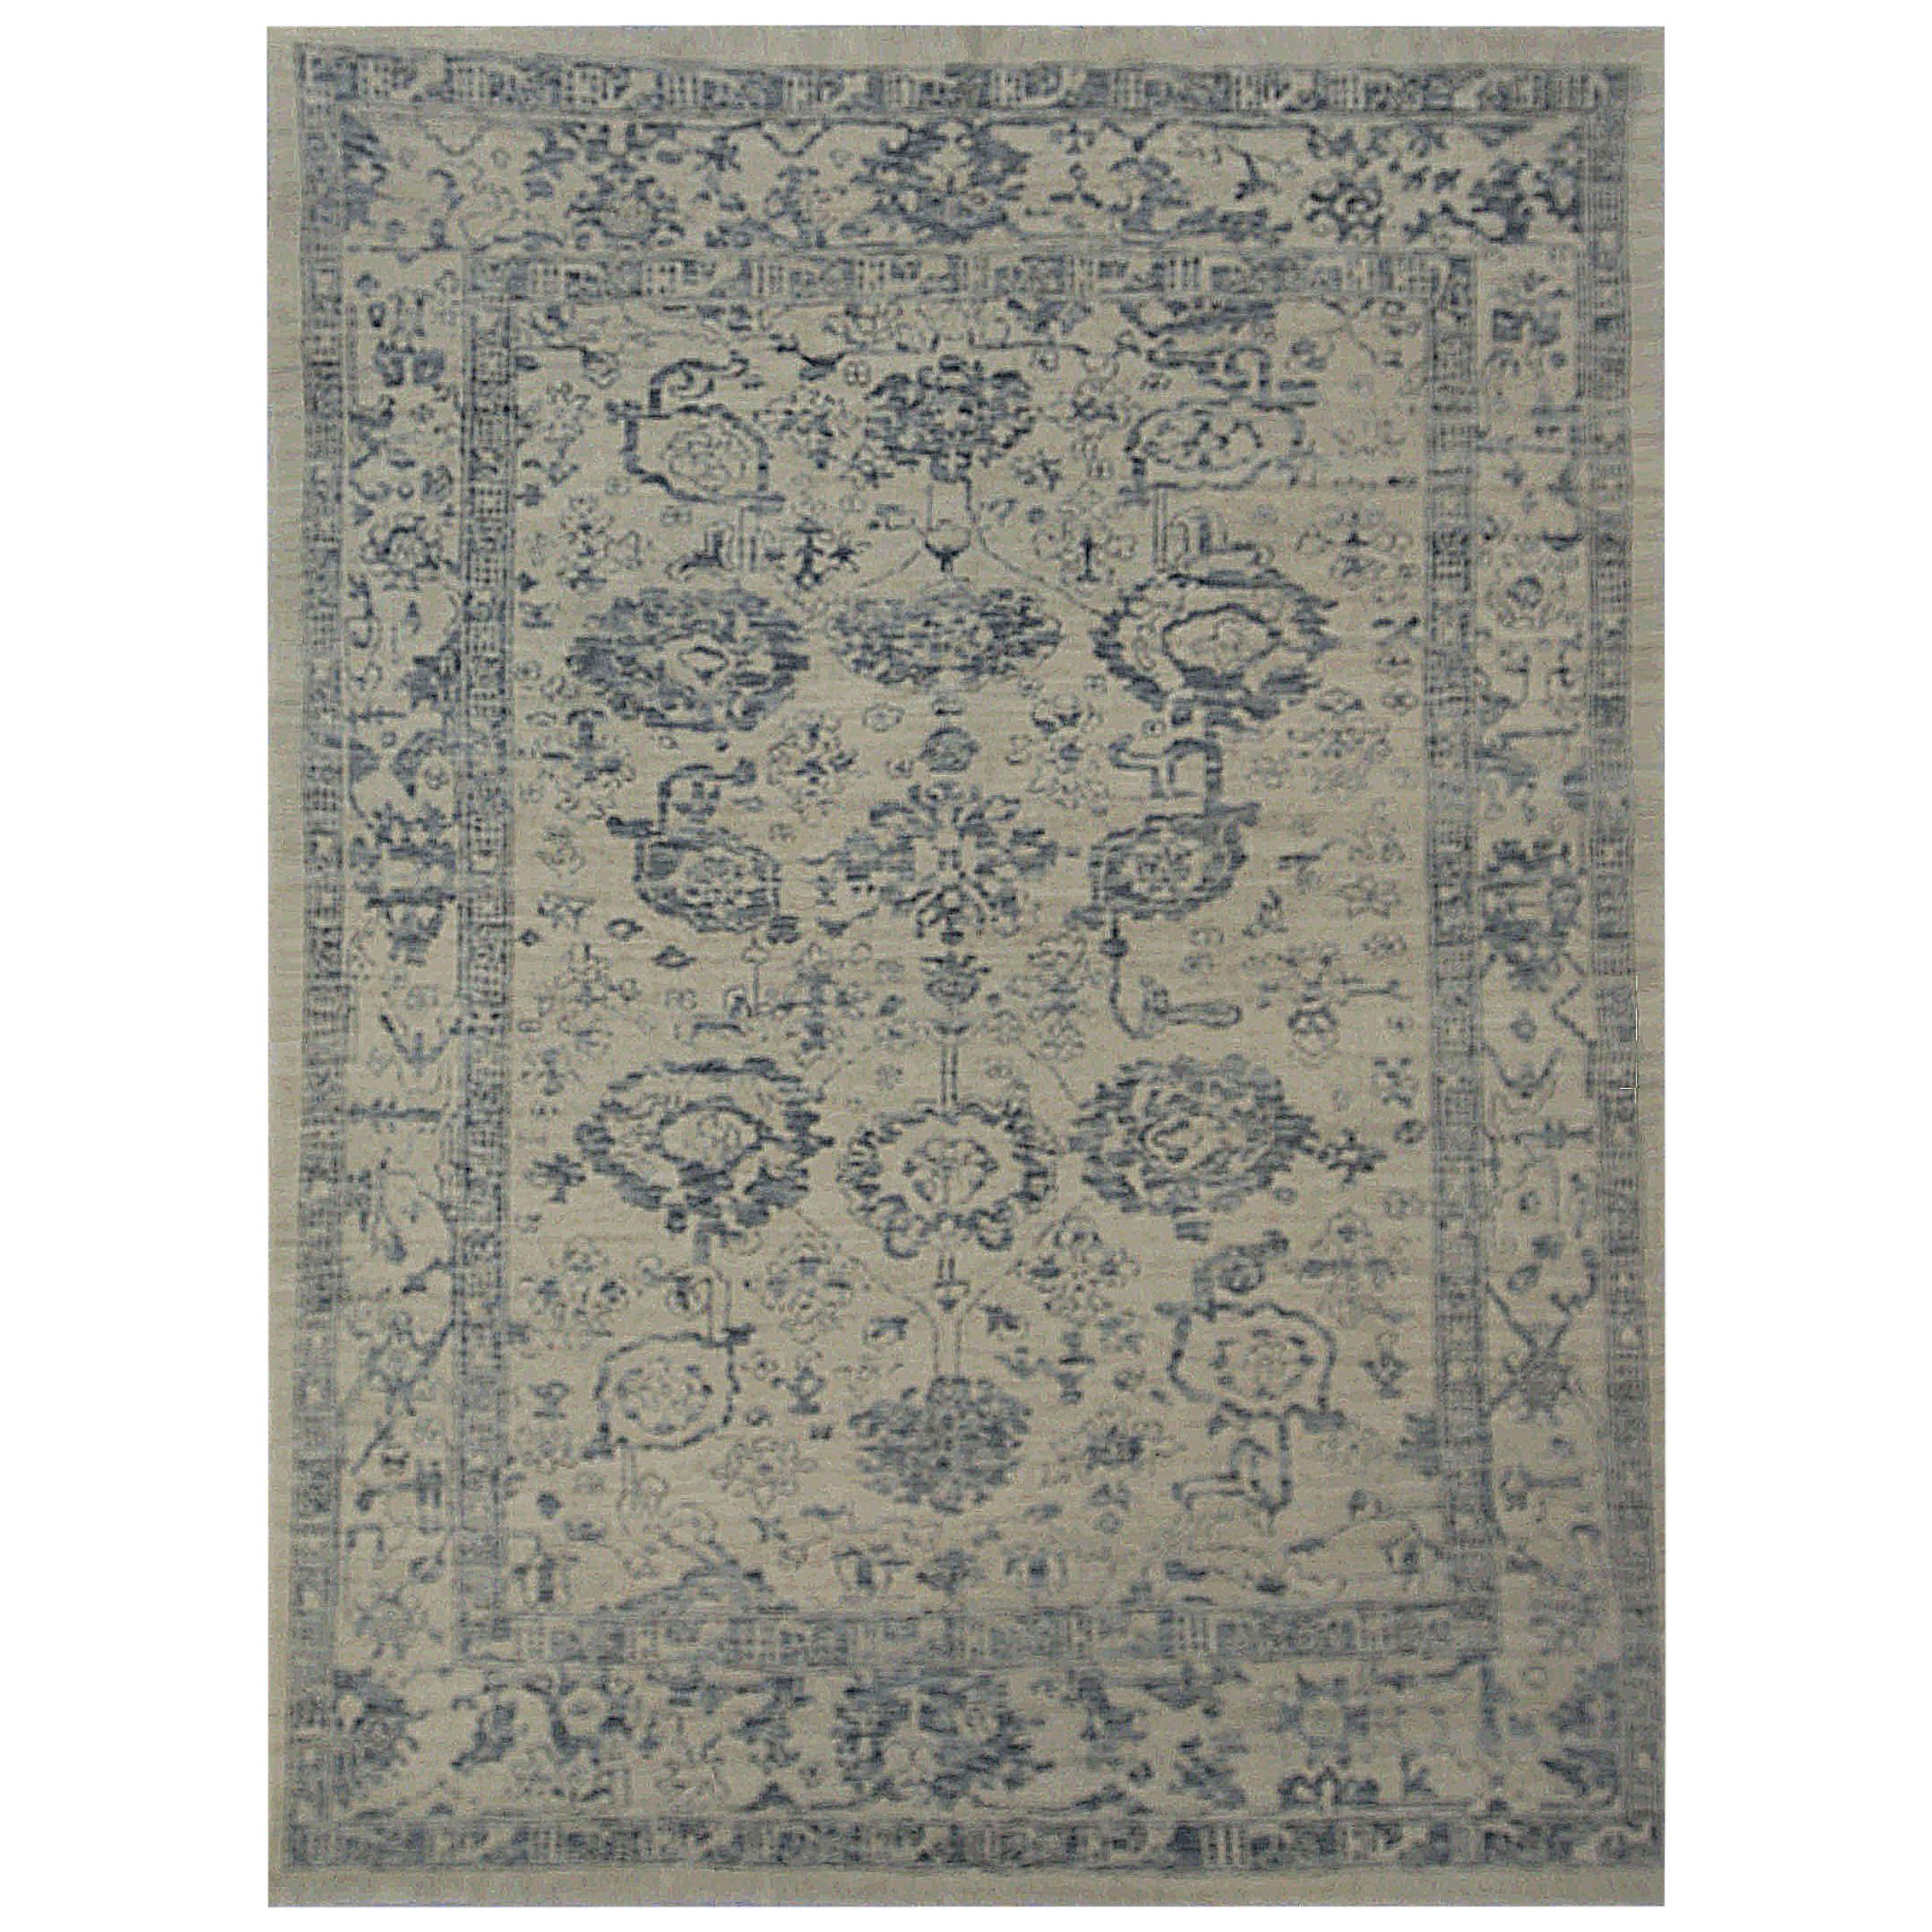 Modern Oushak Rug with Floral Details in Navy and Gray on Beige Ivory Field For Sale